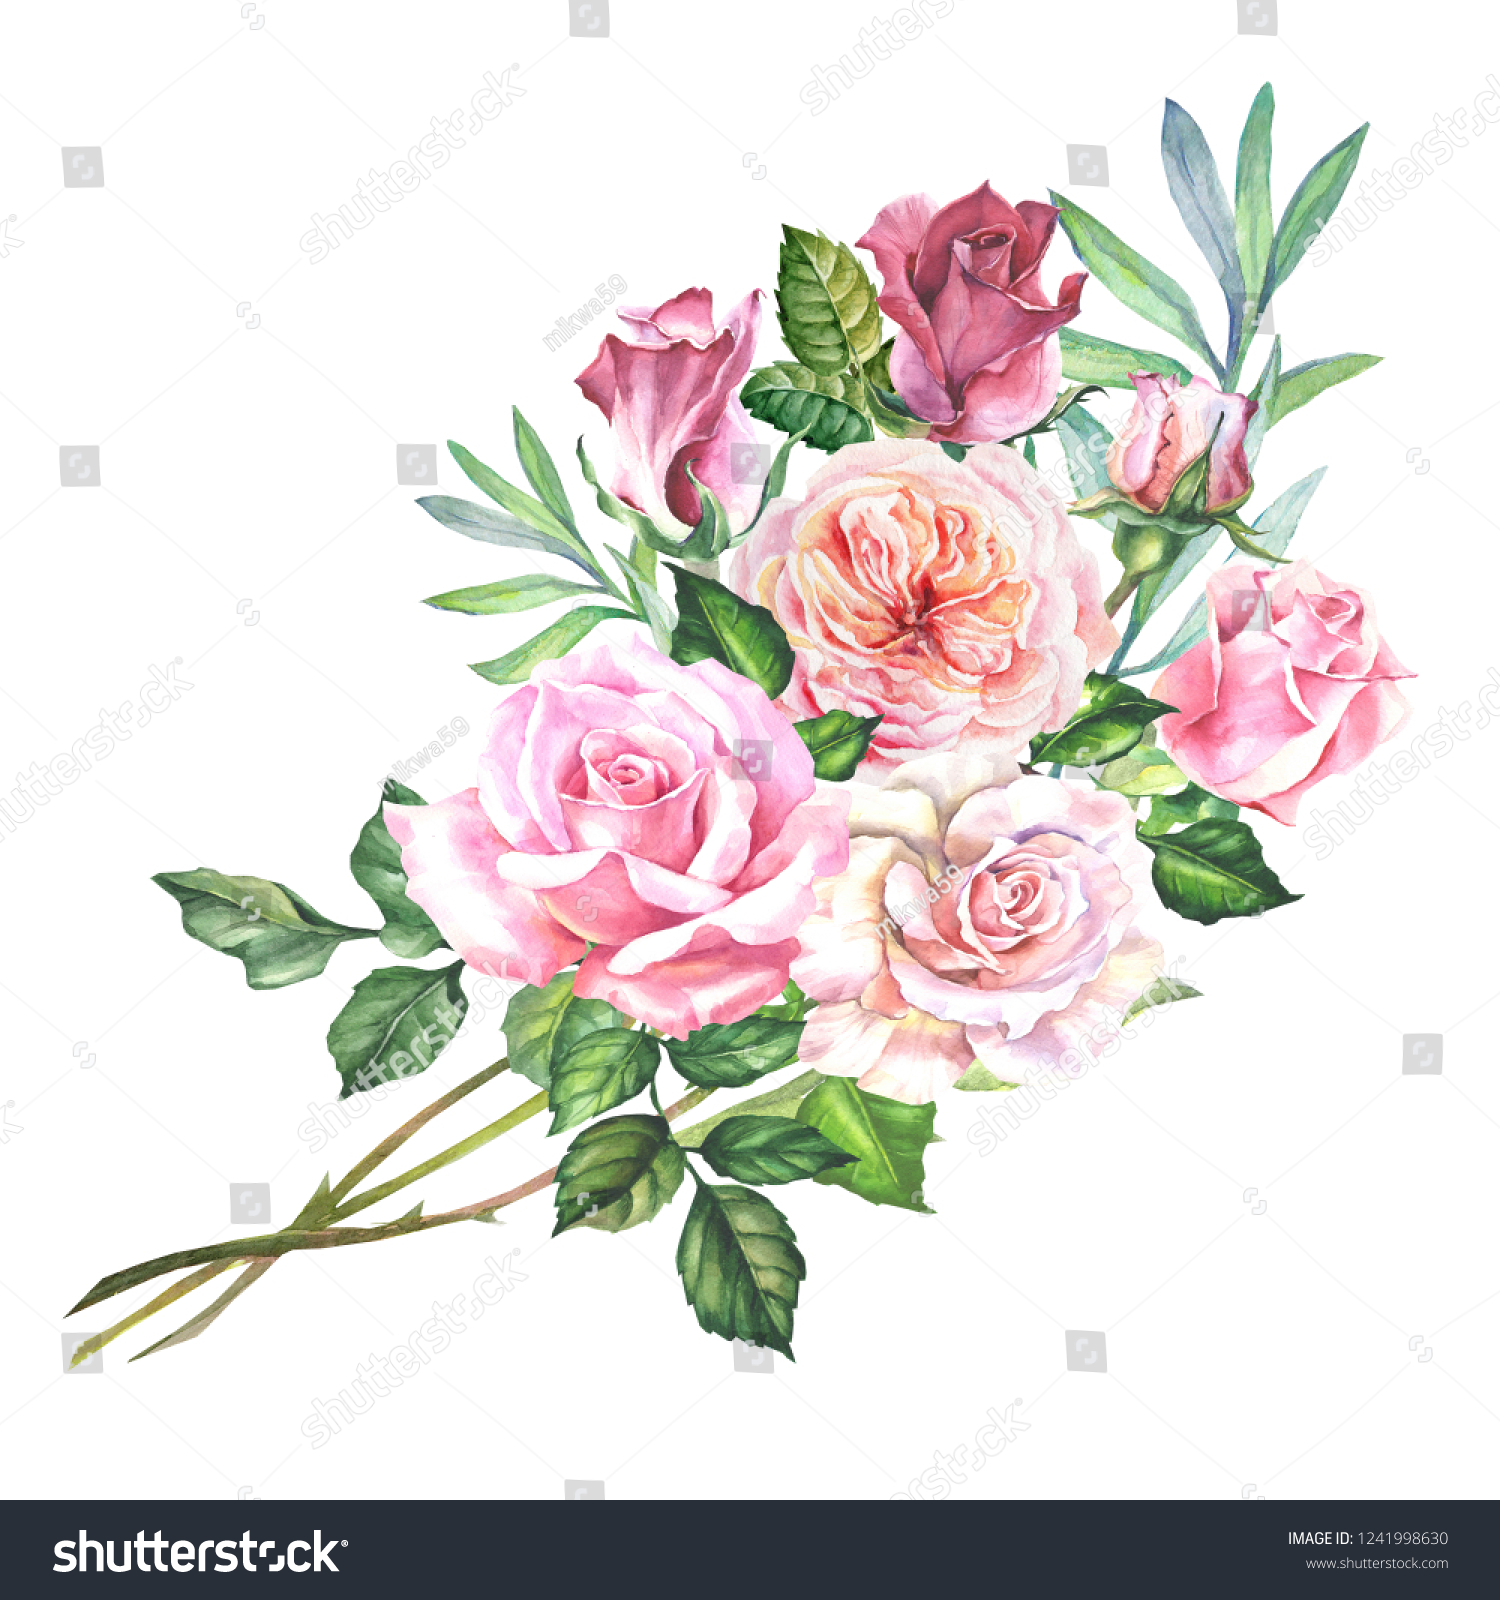 Watercolor Bouquet Pink Roses Stock Illustration 1241998630 | Shutterstock